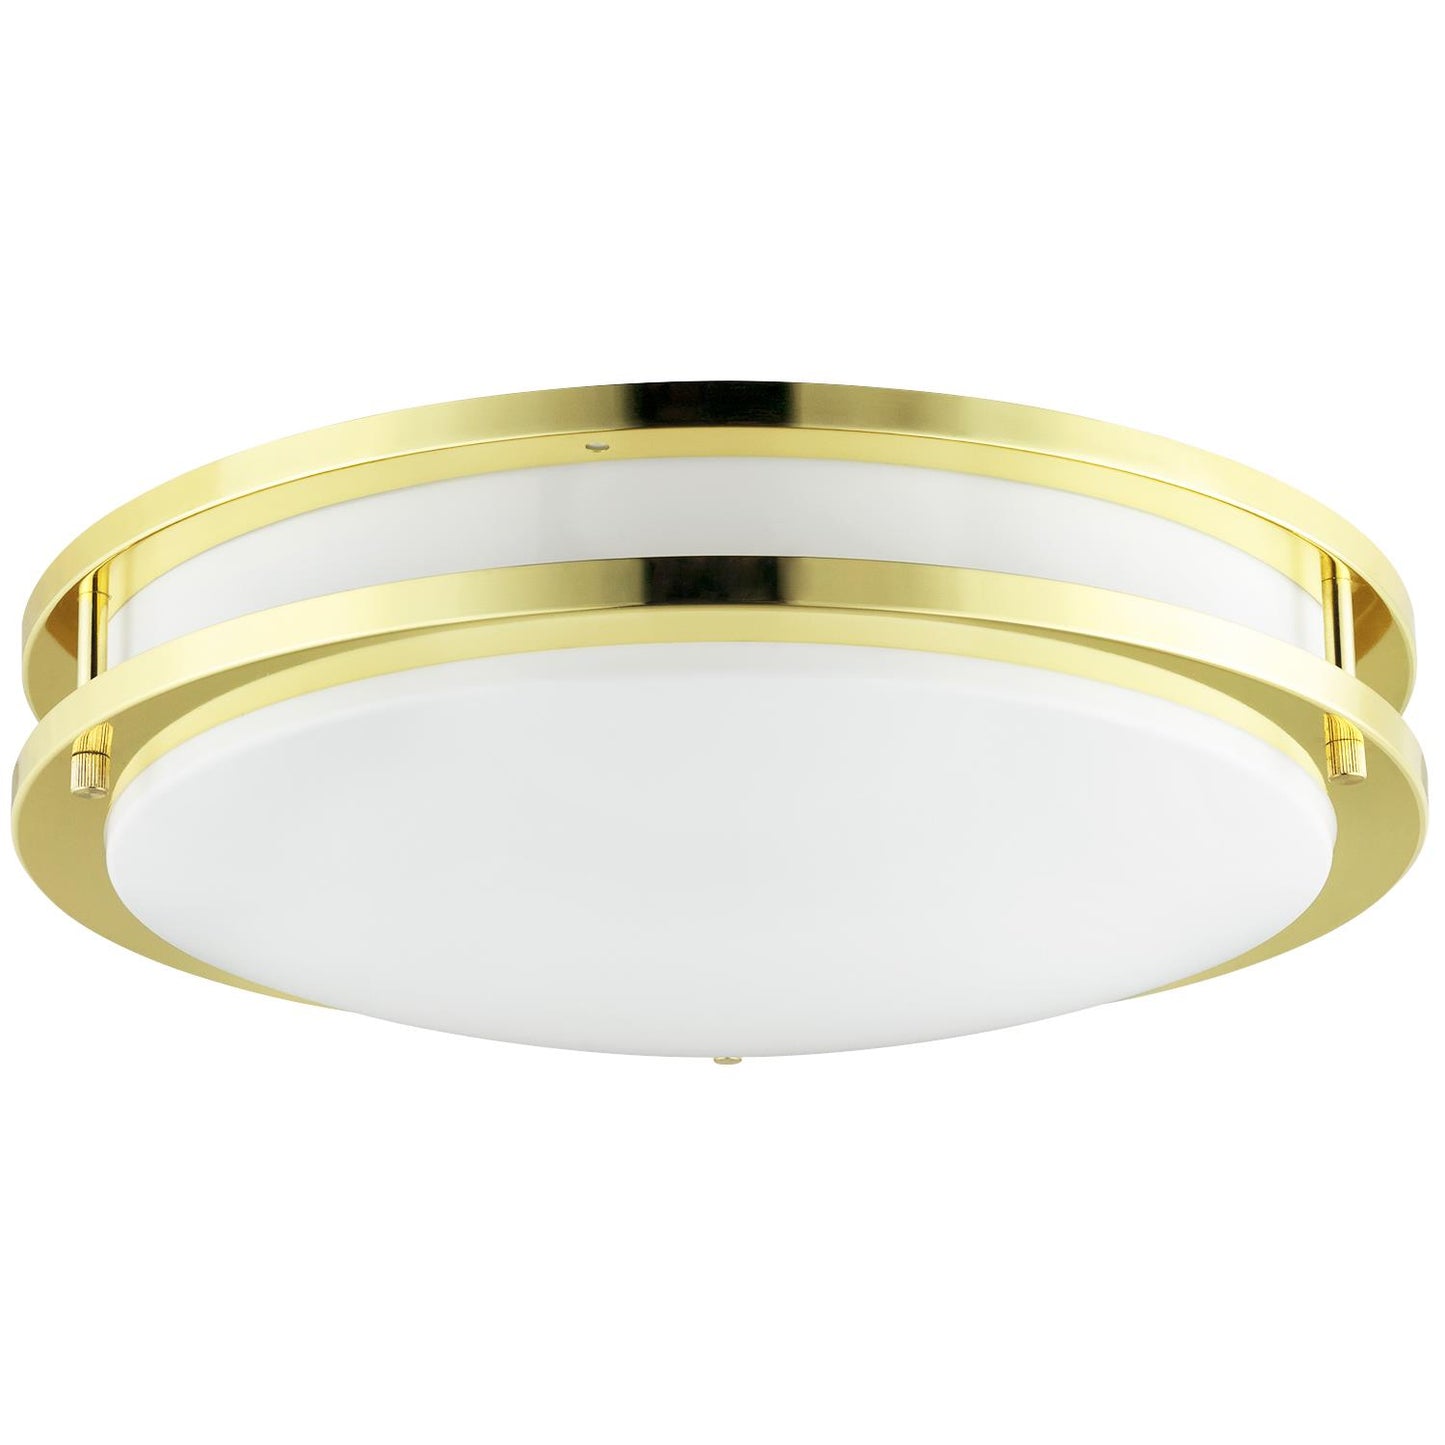 Sunlite 45586 18-Inch Fluorescent Double Band Trim Flush Mount Light Fixture, Max 46 Wattage (Two Bulbs Included), 3200 Lm, 2700K Soft White, Twist & Lock GU24 Base, 120V, UL Listed, Polished Brass